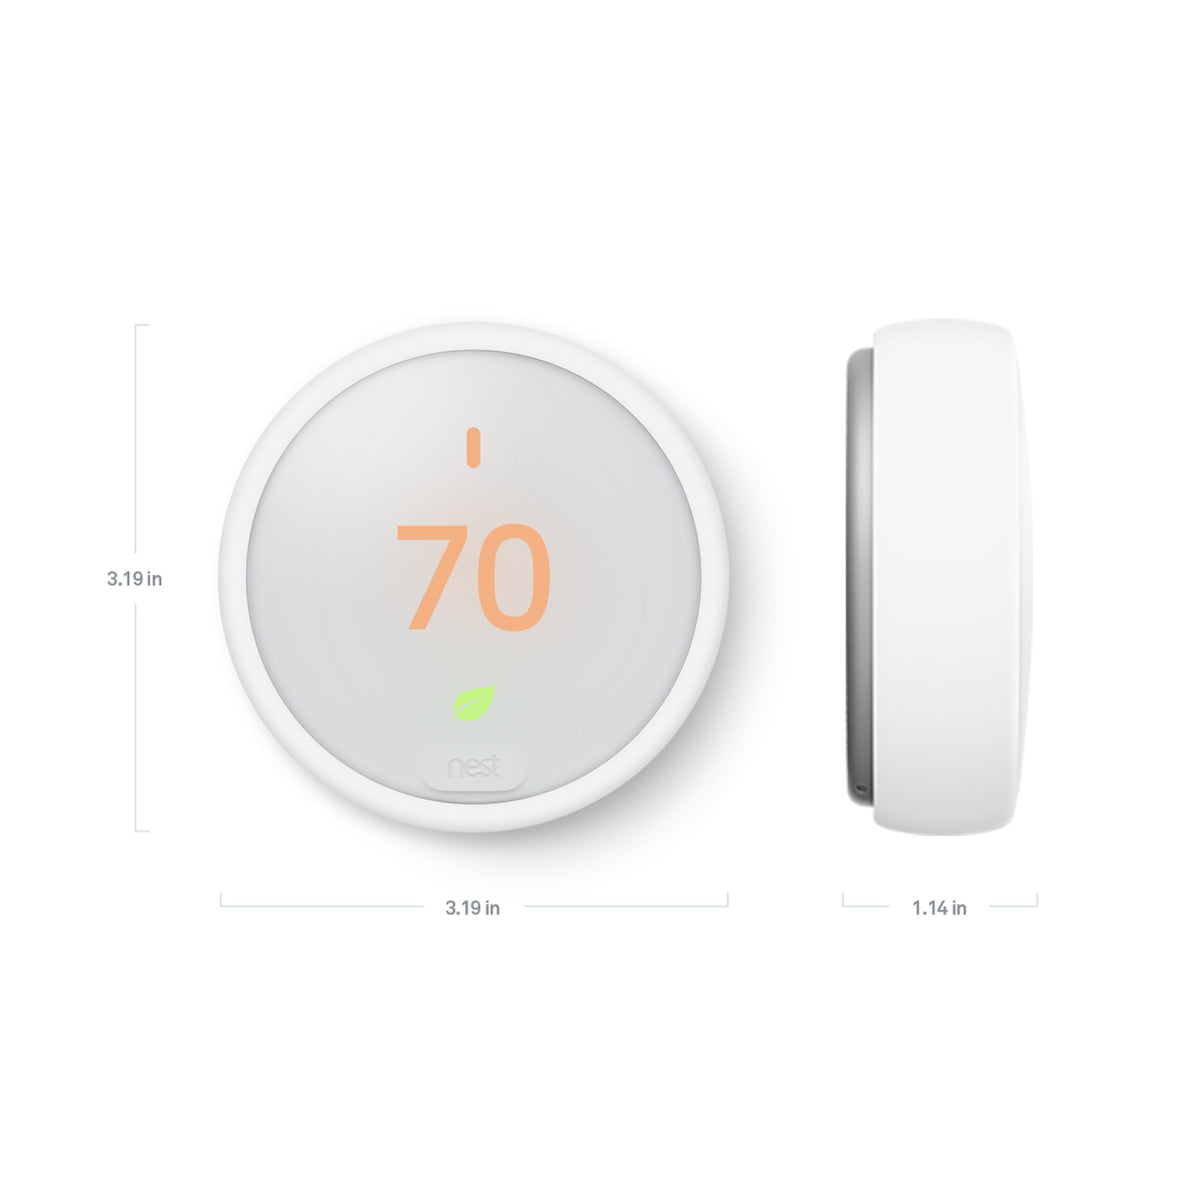 Google Nest Thermostat E - front and side